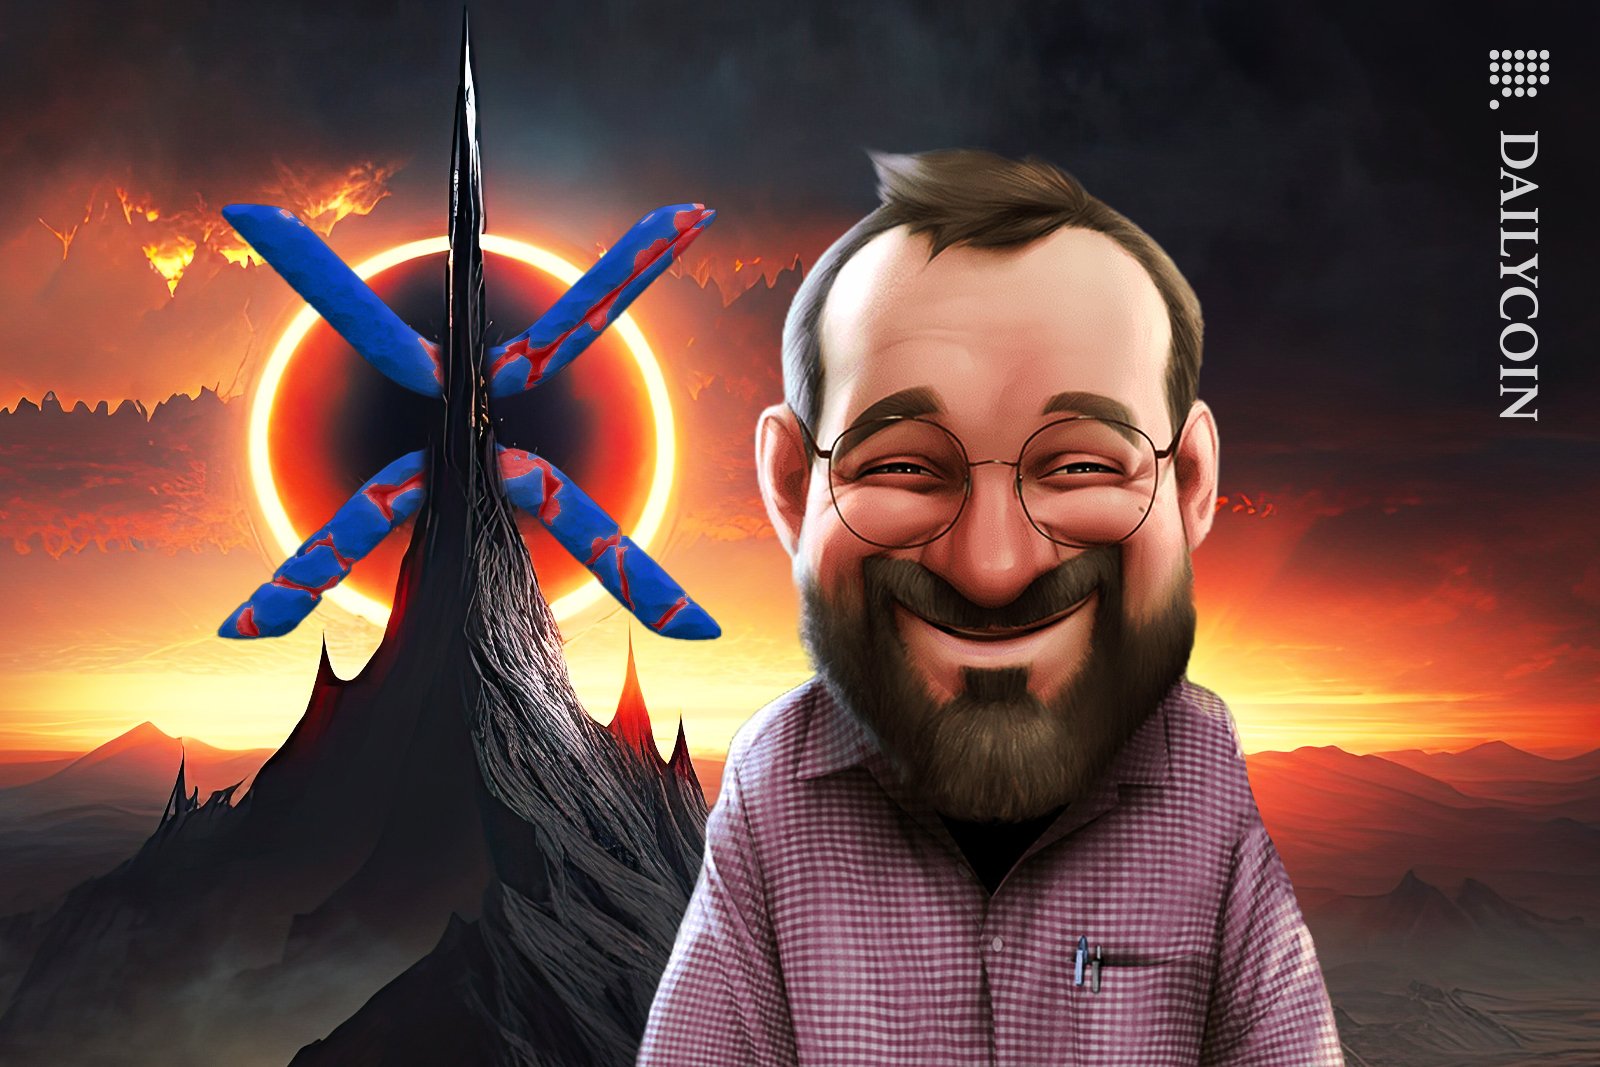 Charles Hoskinson cartoon smiling face front. Dagger mountain in the background, circle of fire and XRP logo in the centre.